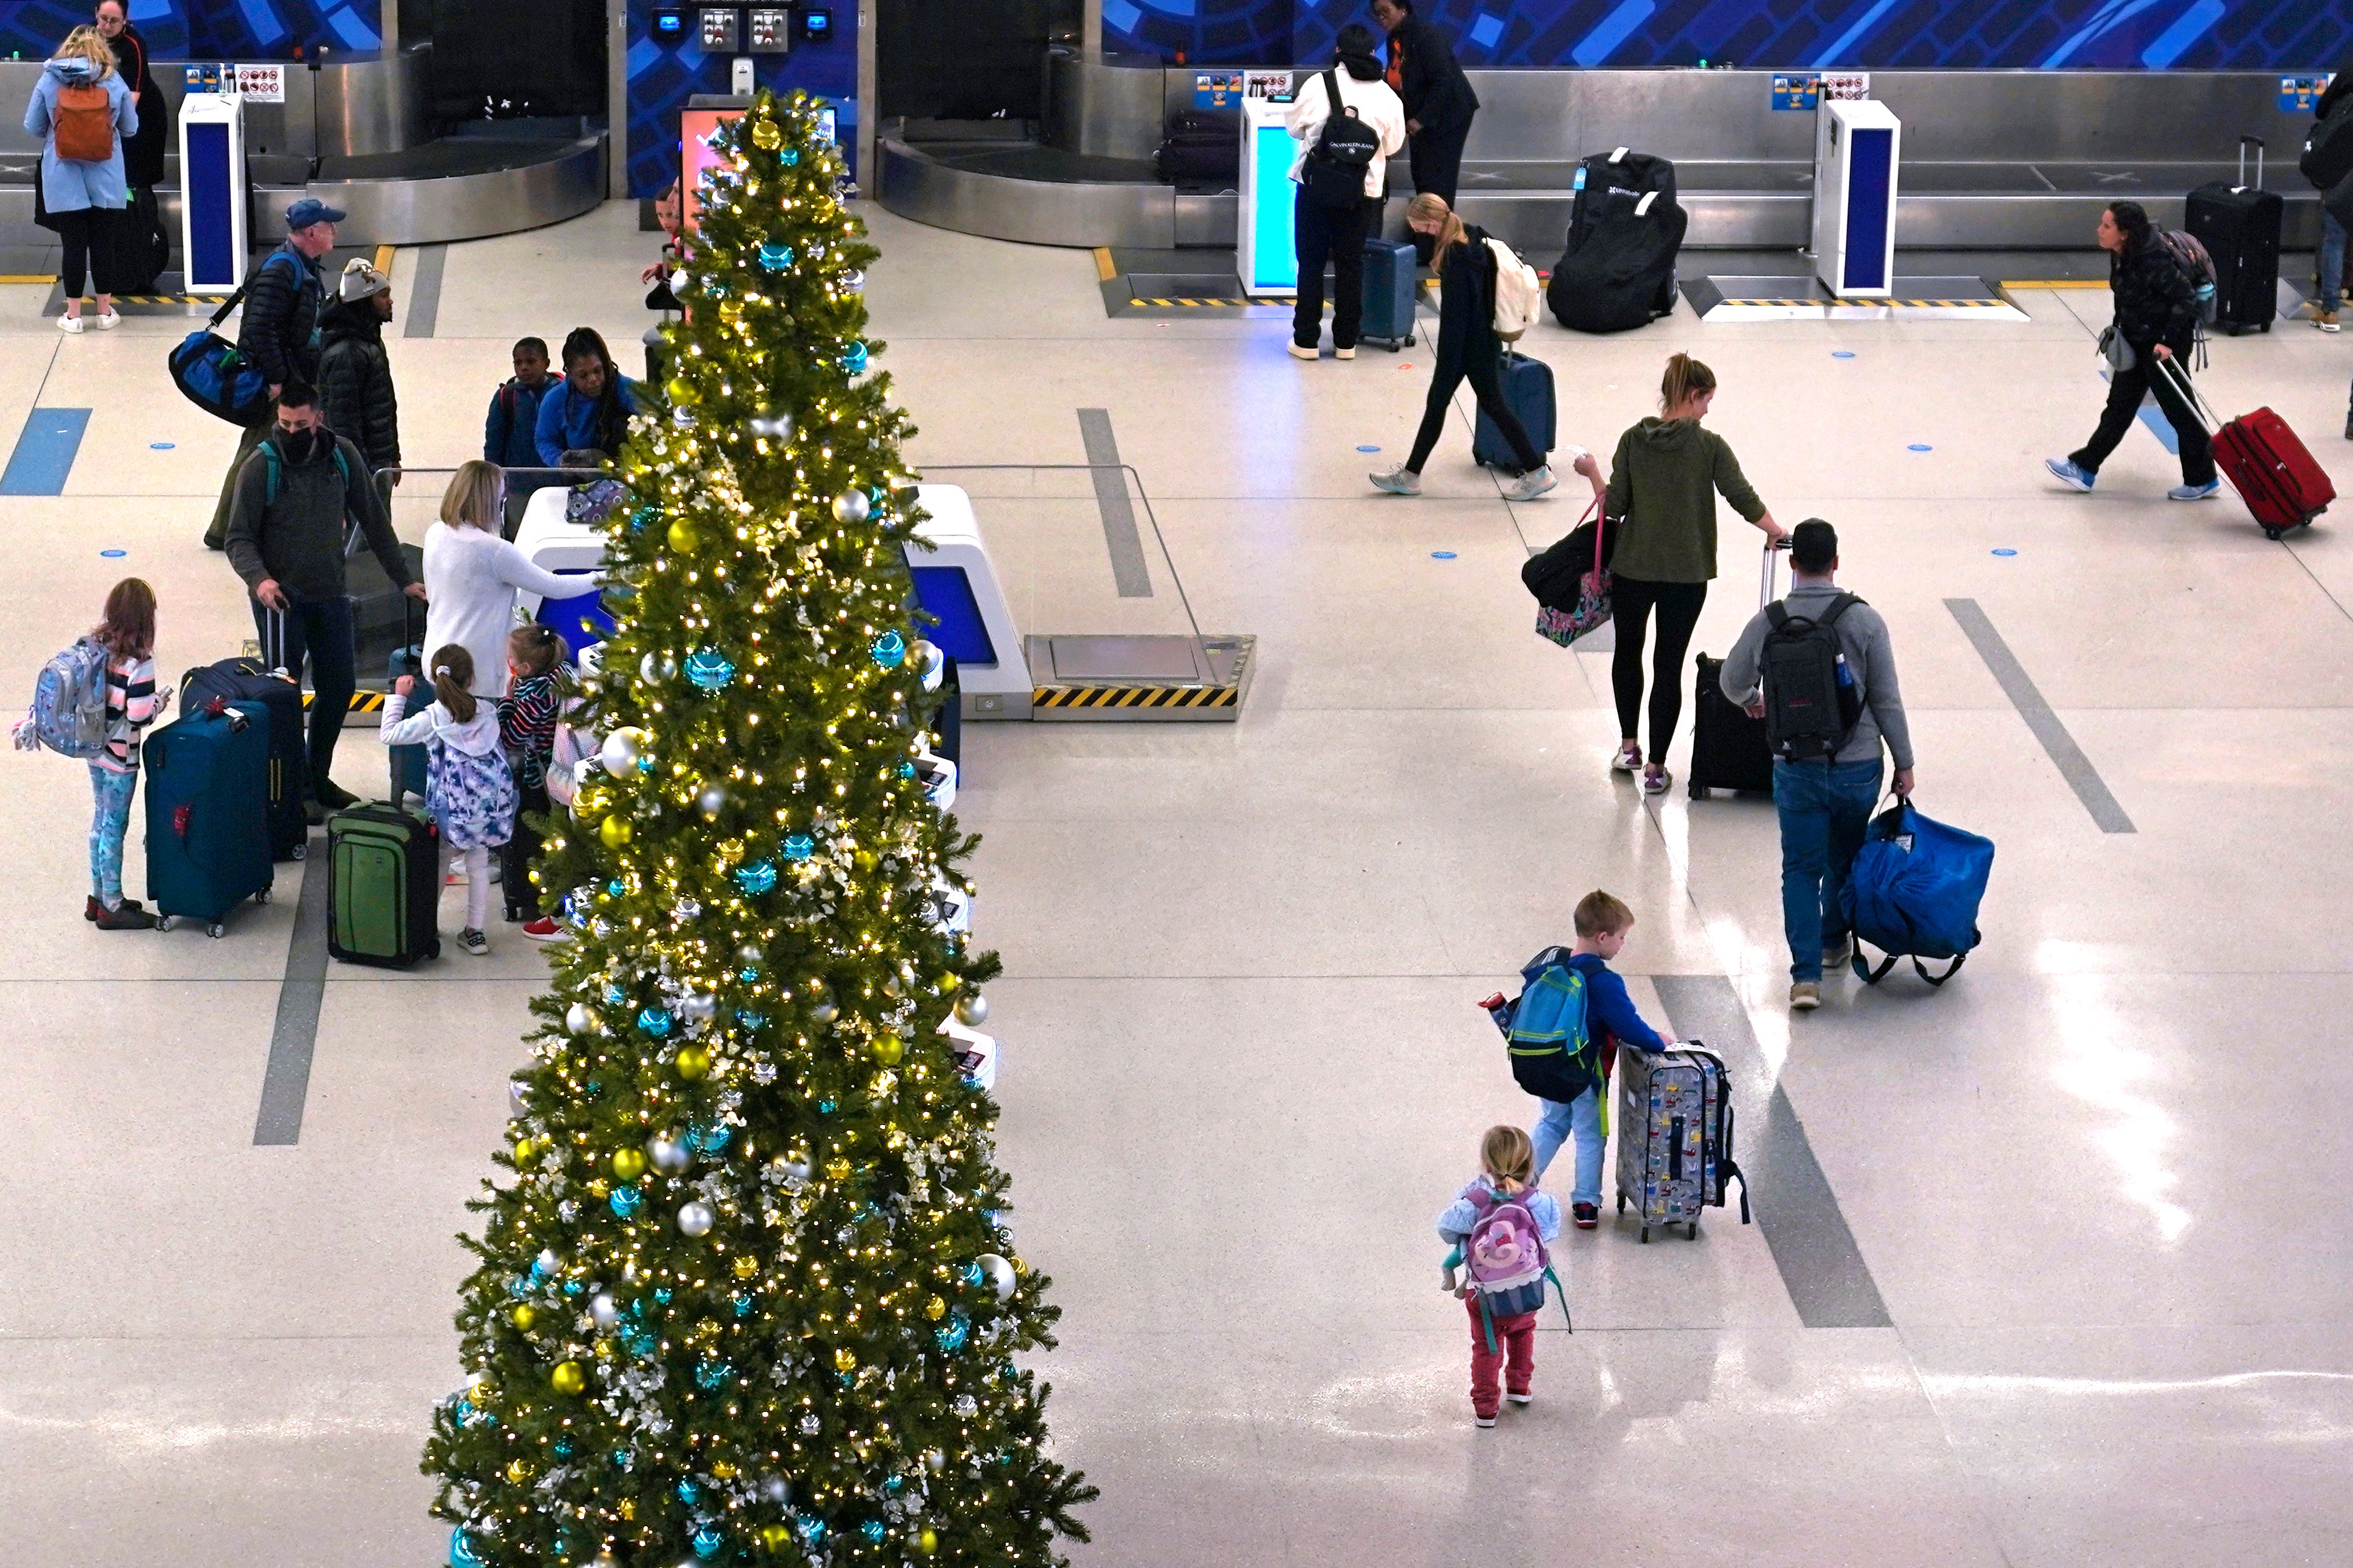 Air fares will be lower on Christmas Day